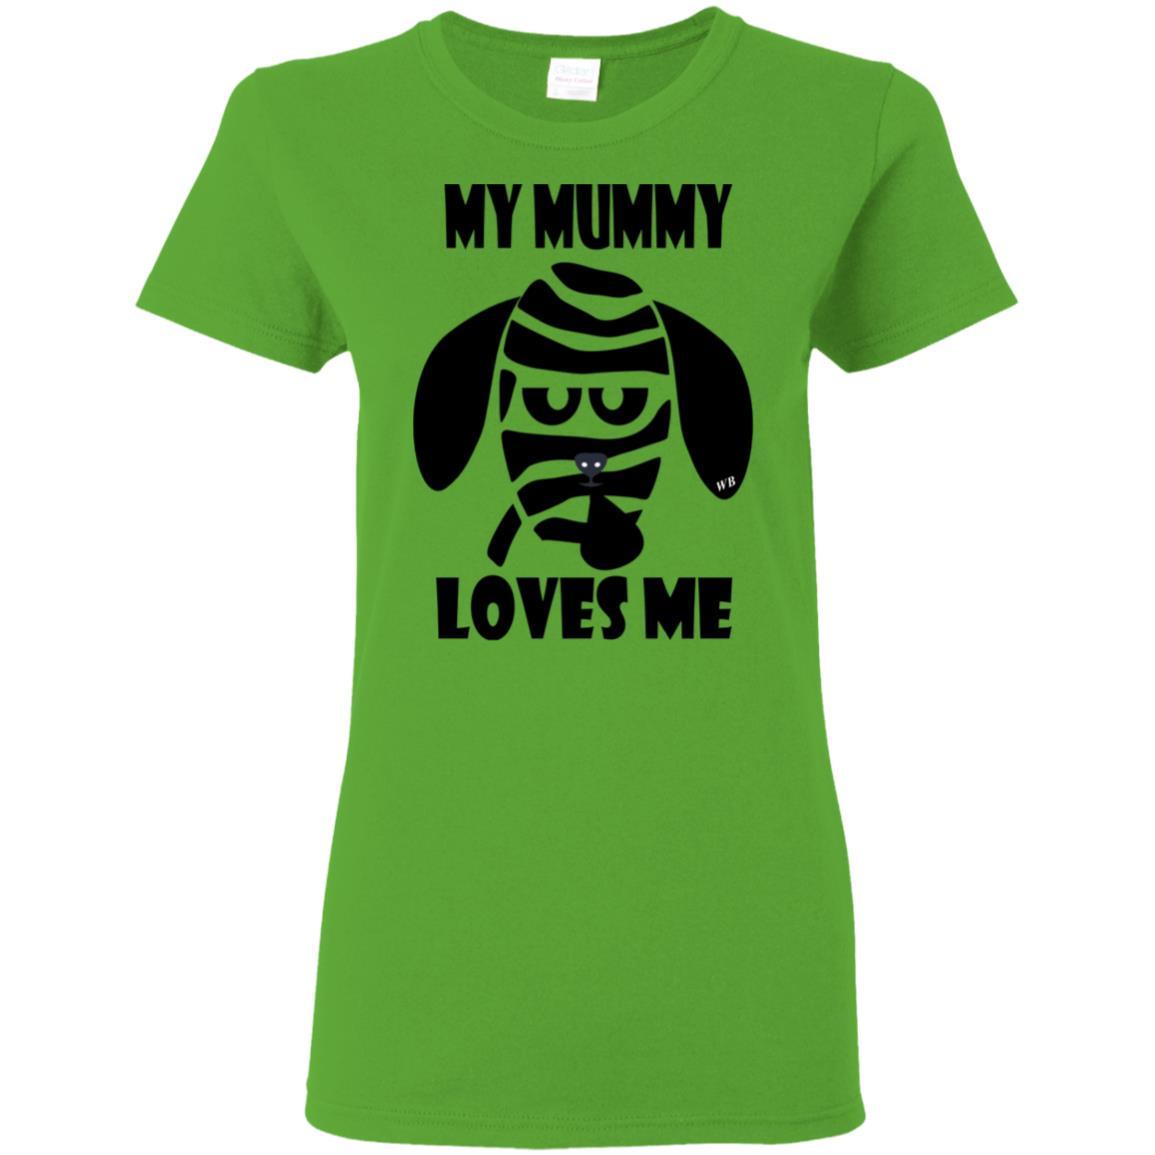 T-Shirts Electric Green / S WineyBitches.Co "My Mummy Loves Me" Halloween Collection Ladies' 5.3 oz. T-Shirt WineyBitchesCo